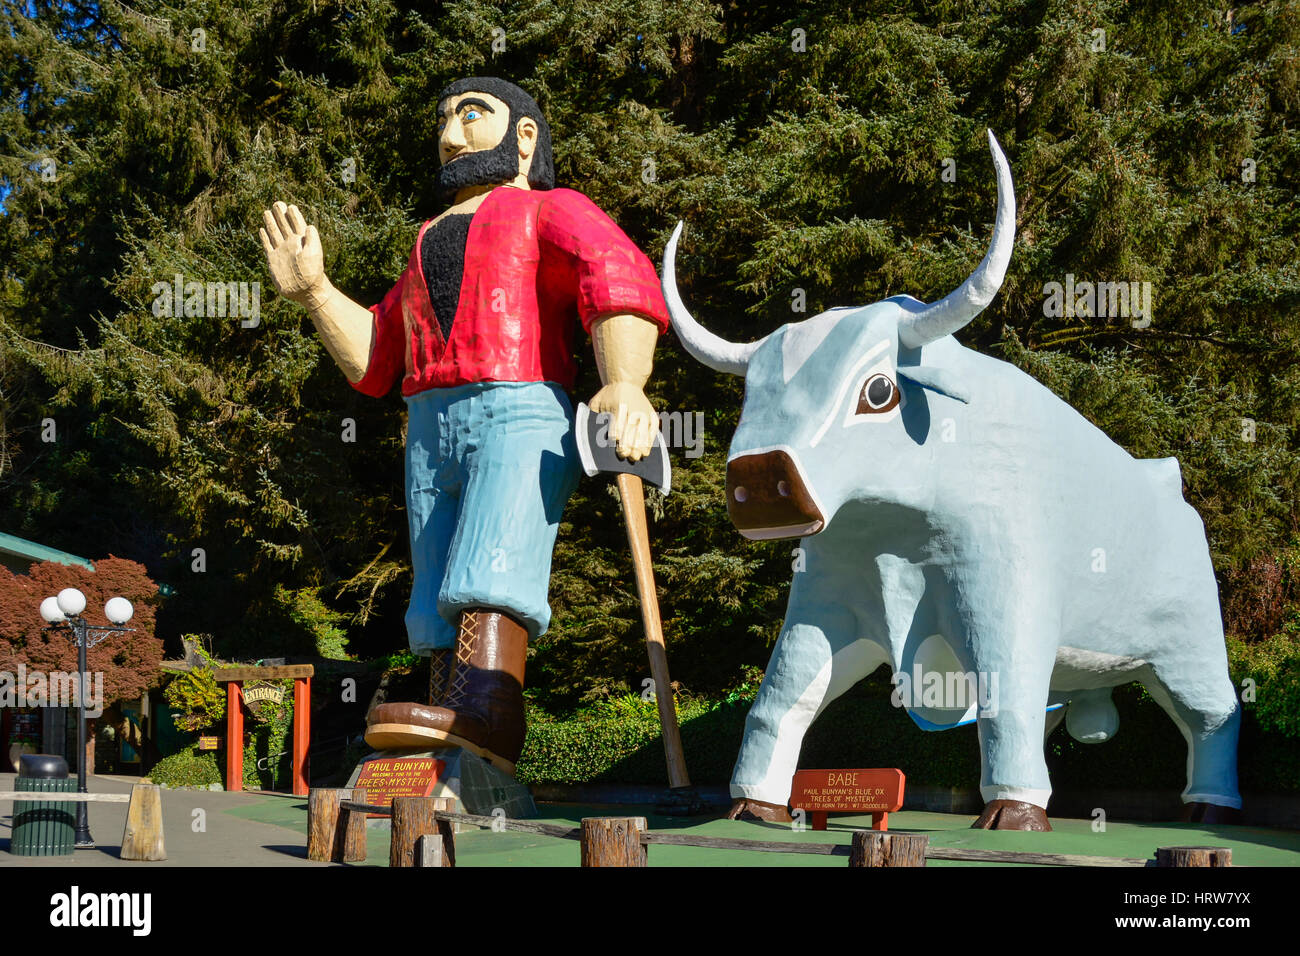 Paul Bunyan and Babe the Blue Ox statues at 'Trees of Mystery' visitor attraction in the Redwoods on Highway 101, near Klamath, California. Stock Photo